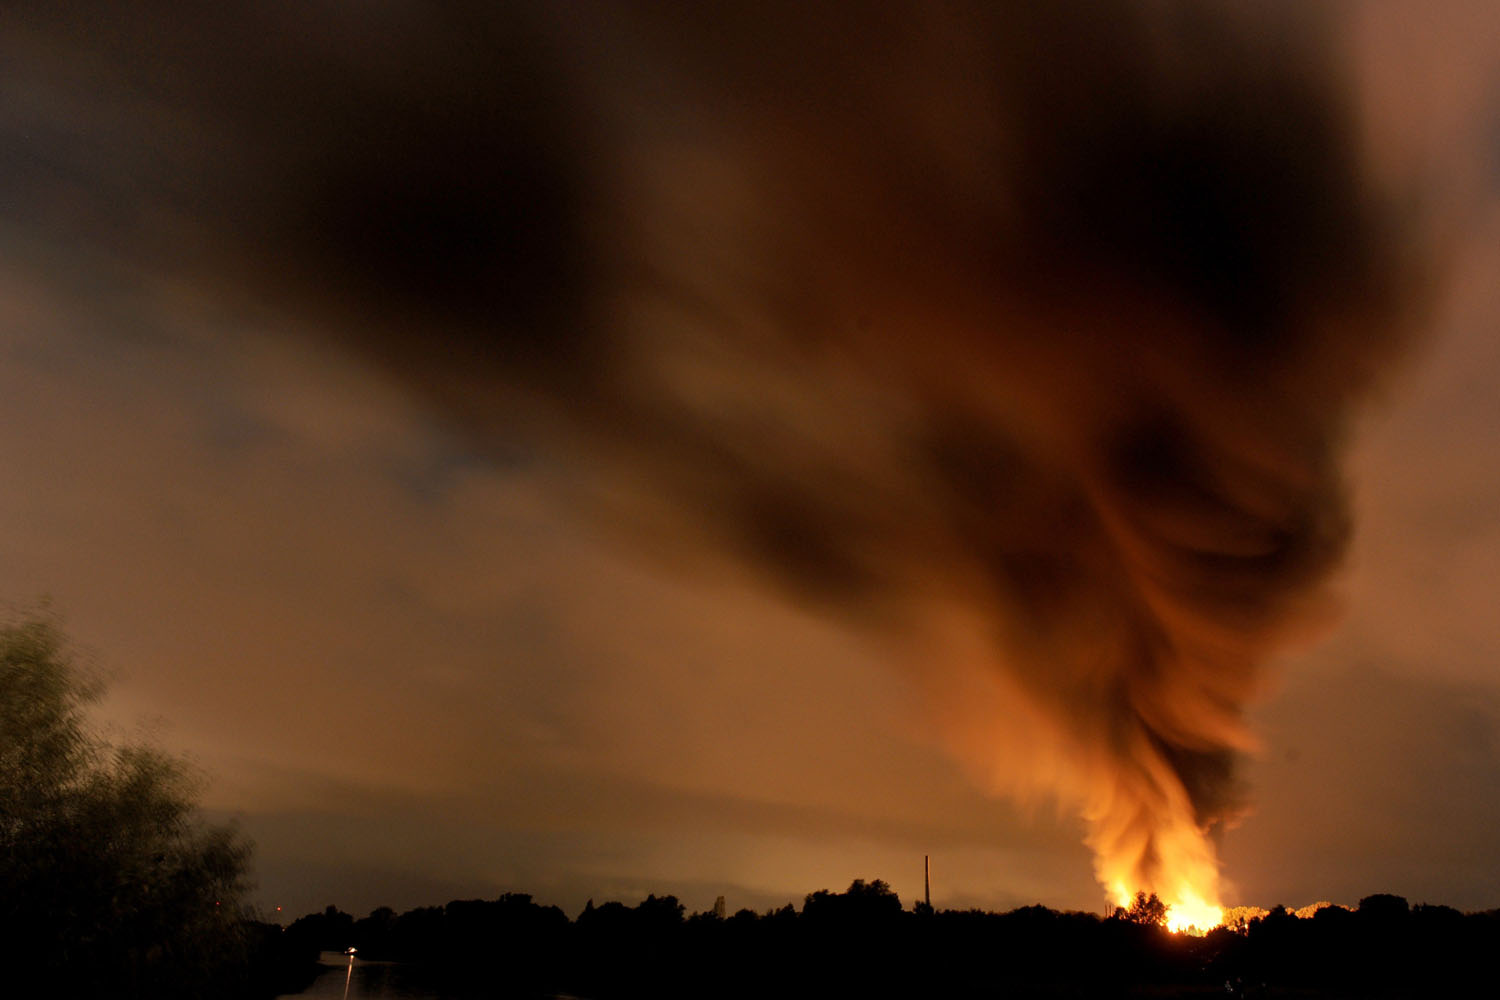 Sept. 9, 2014. Smoke rises in the sky as a factory is burning after an explosion in Ritterhude, western Germany. According to local media an explosion occured earlier in the evening at a chemical plants area where lacquer companies Organo Fluid and Bergolin have sites.